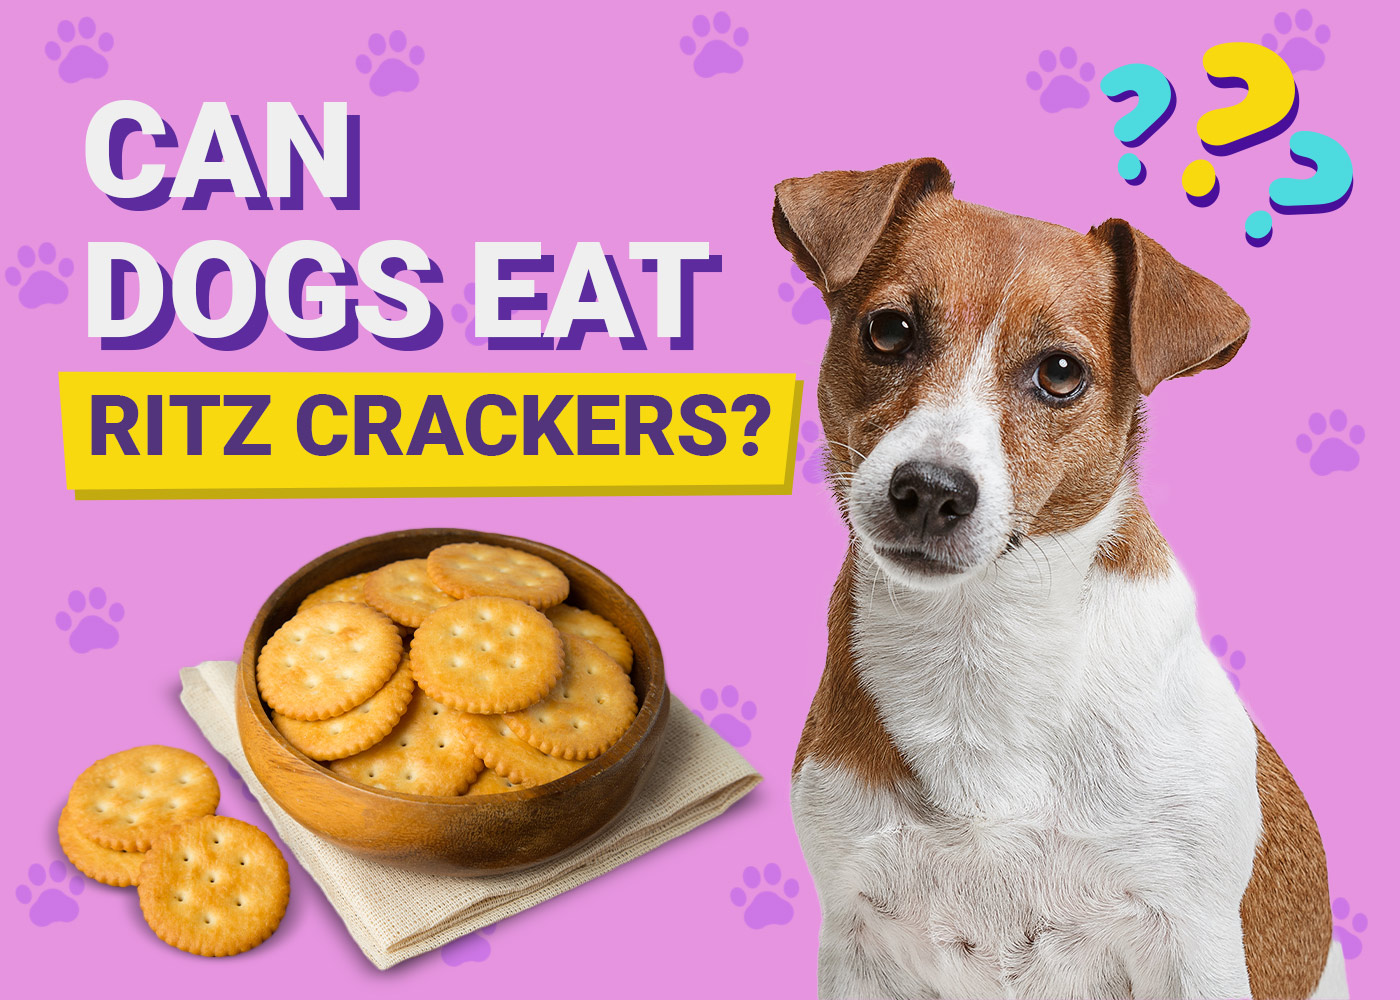 Can Dogs Eat Ritz Crackers